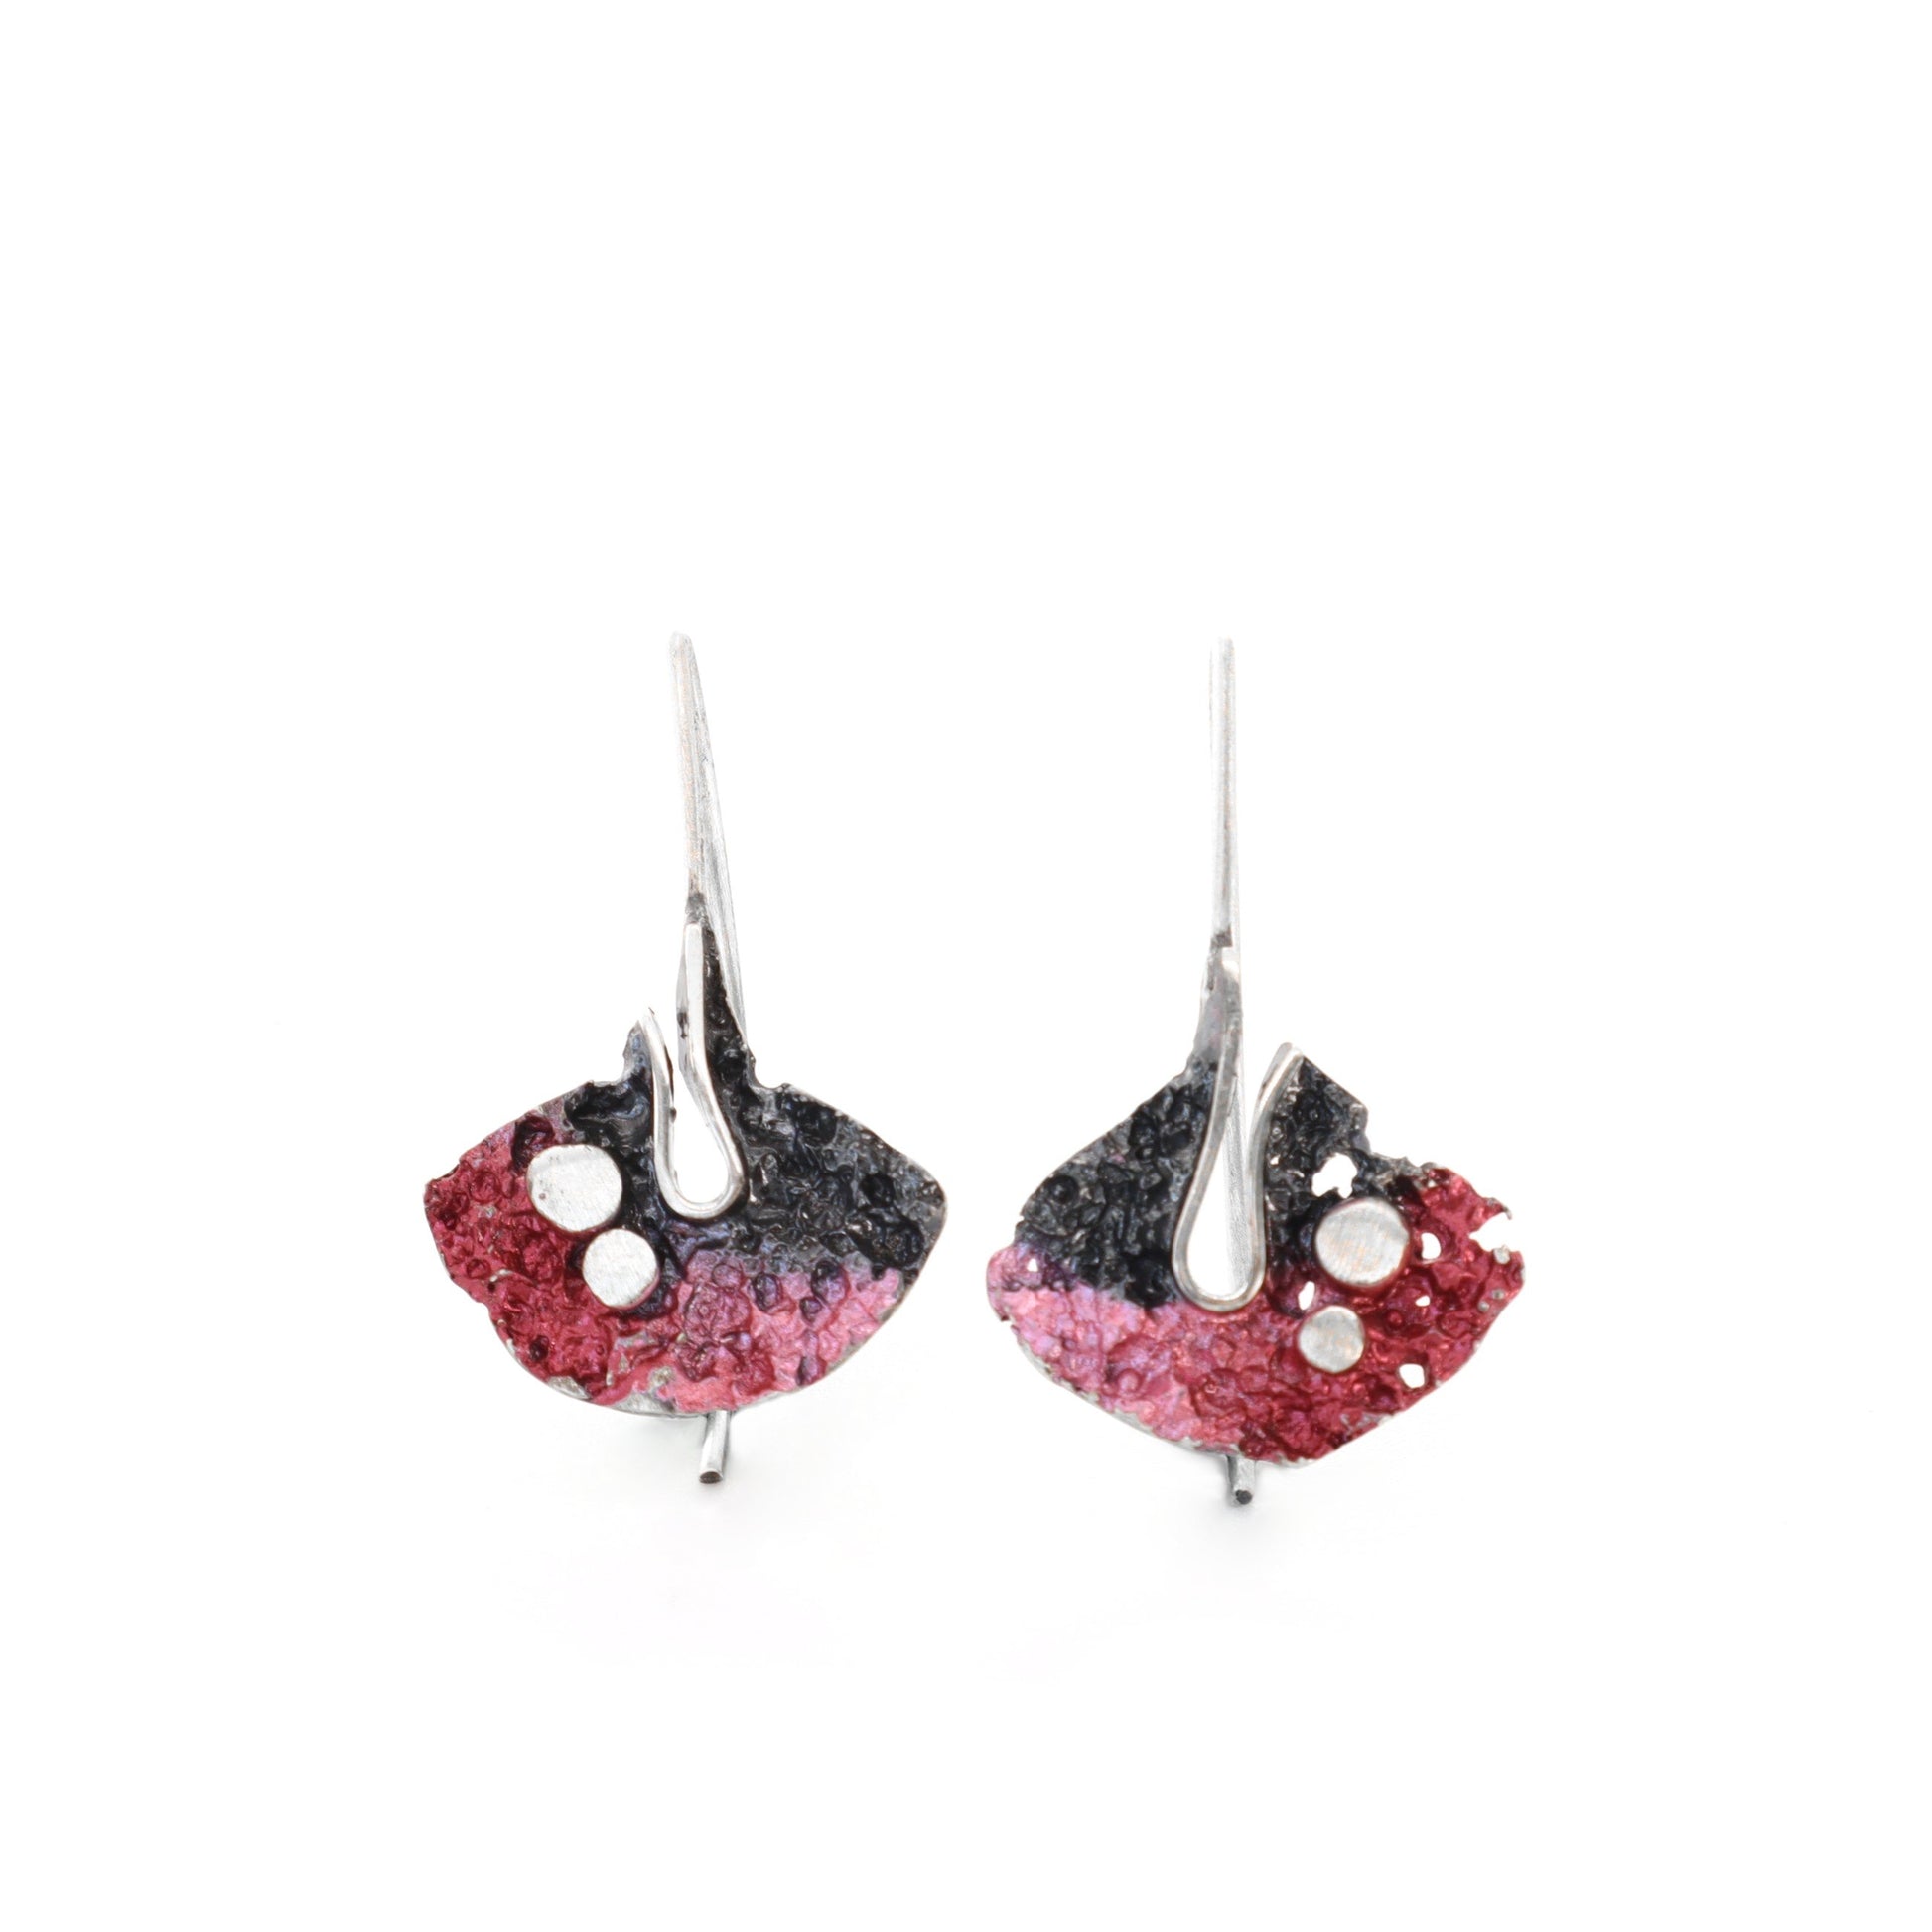 sterling silver stingray earrings with hook back in natural red pigment